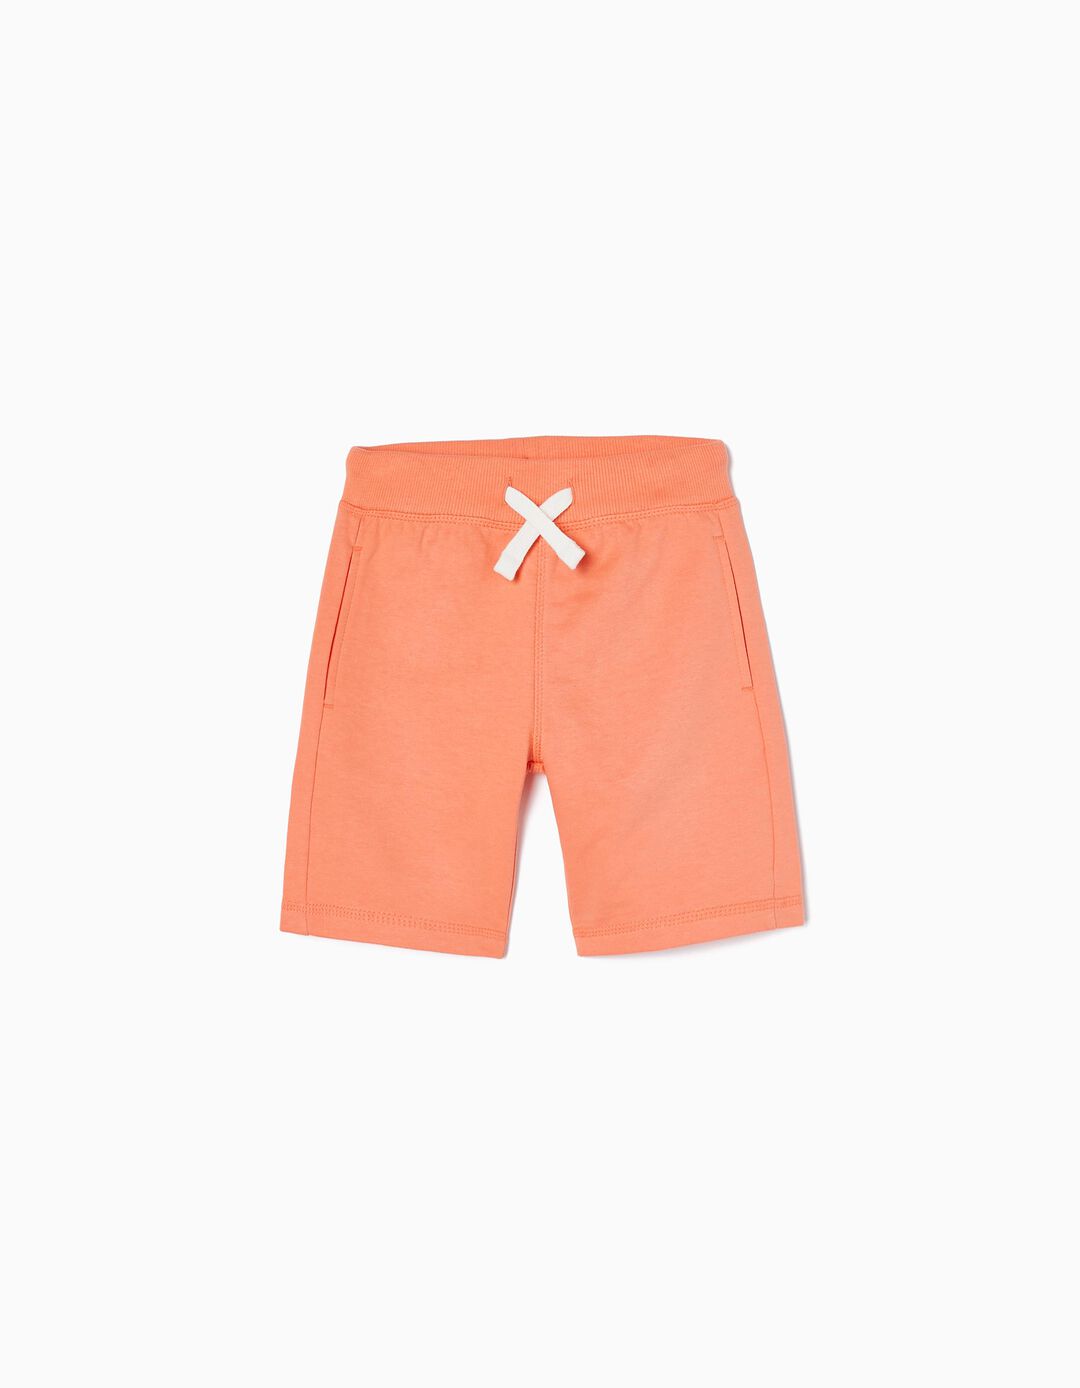 Sports Shorts for Boys, Coral